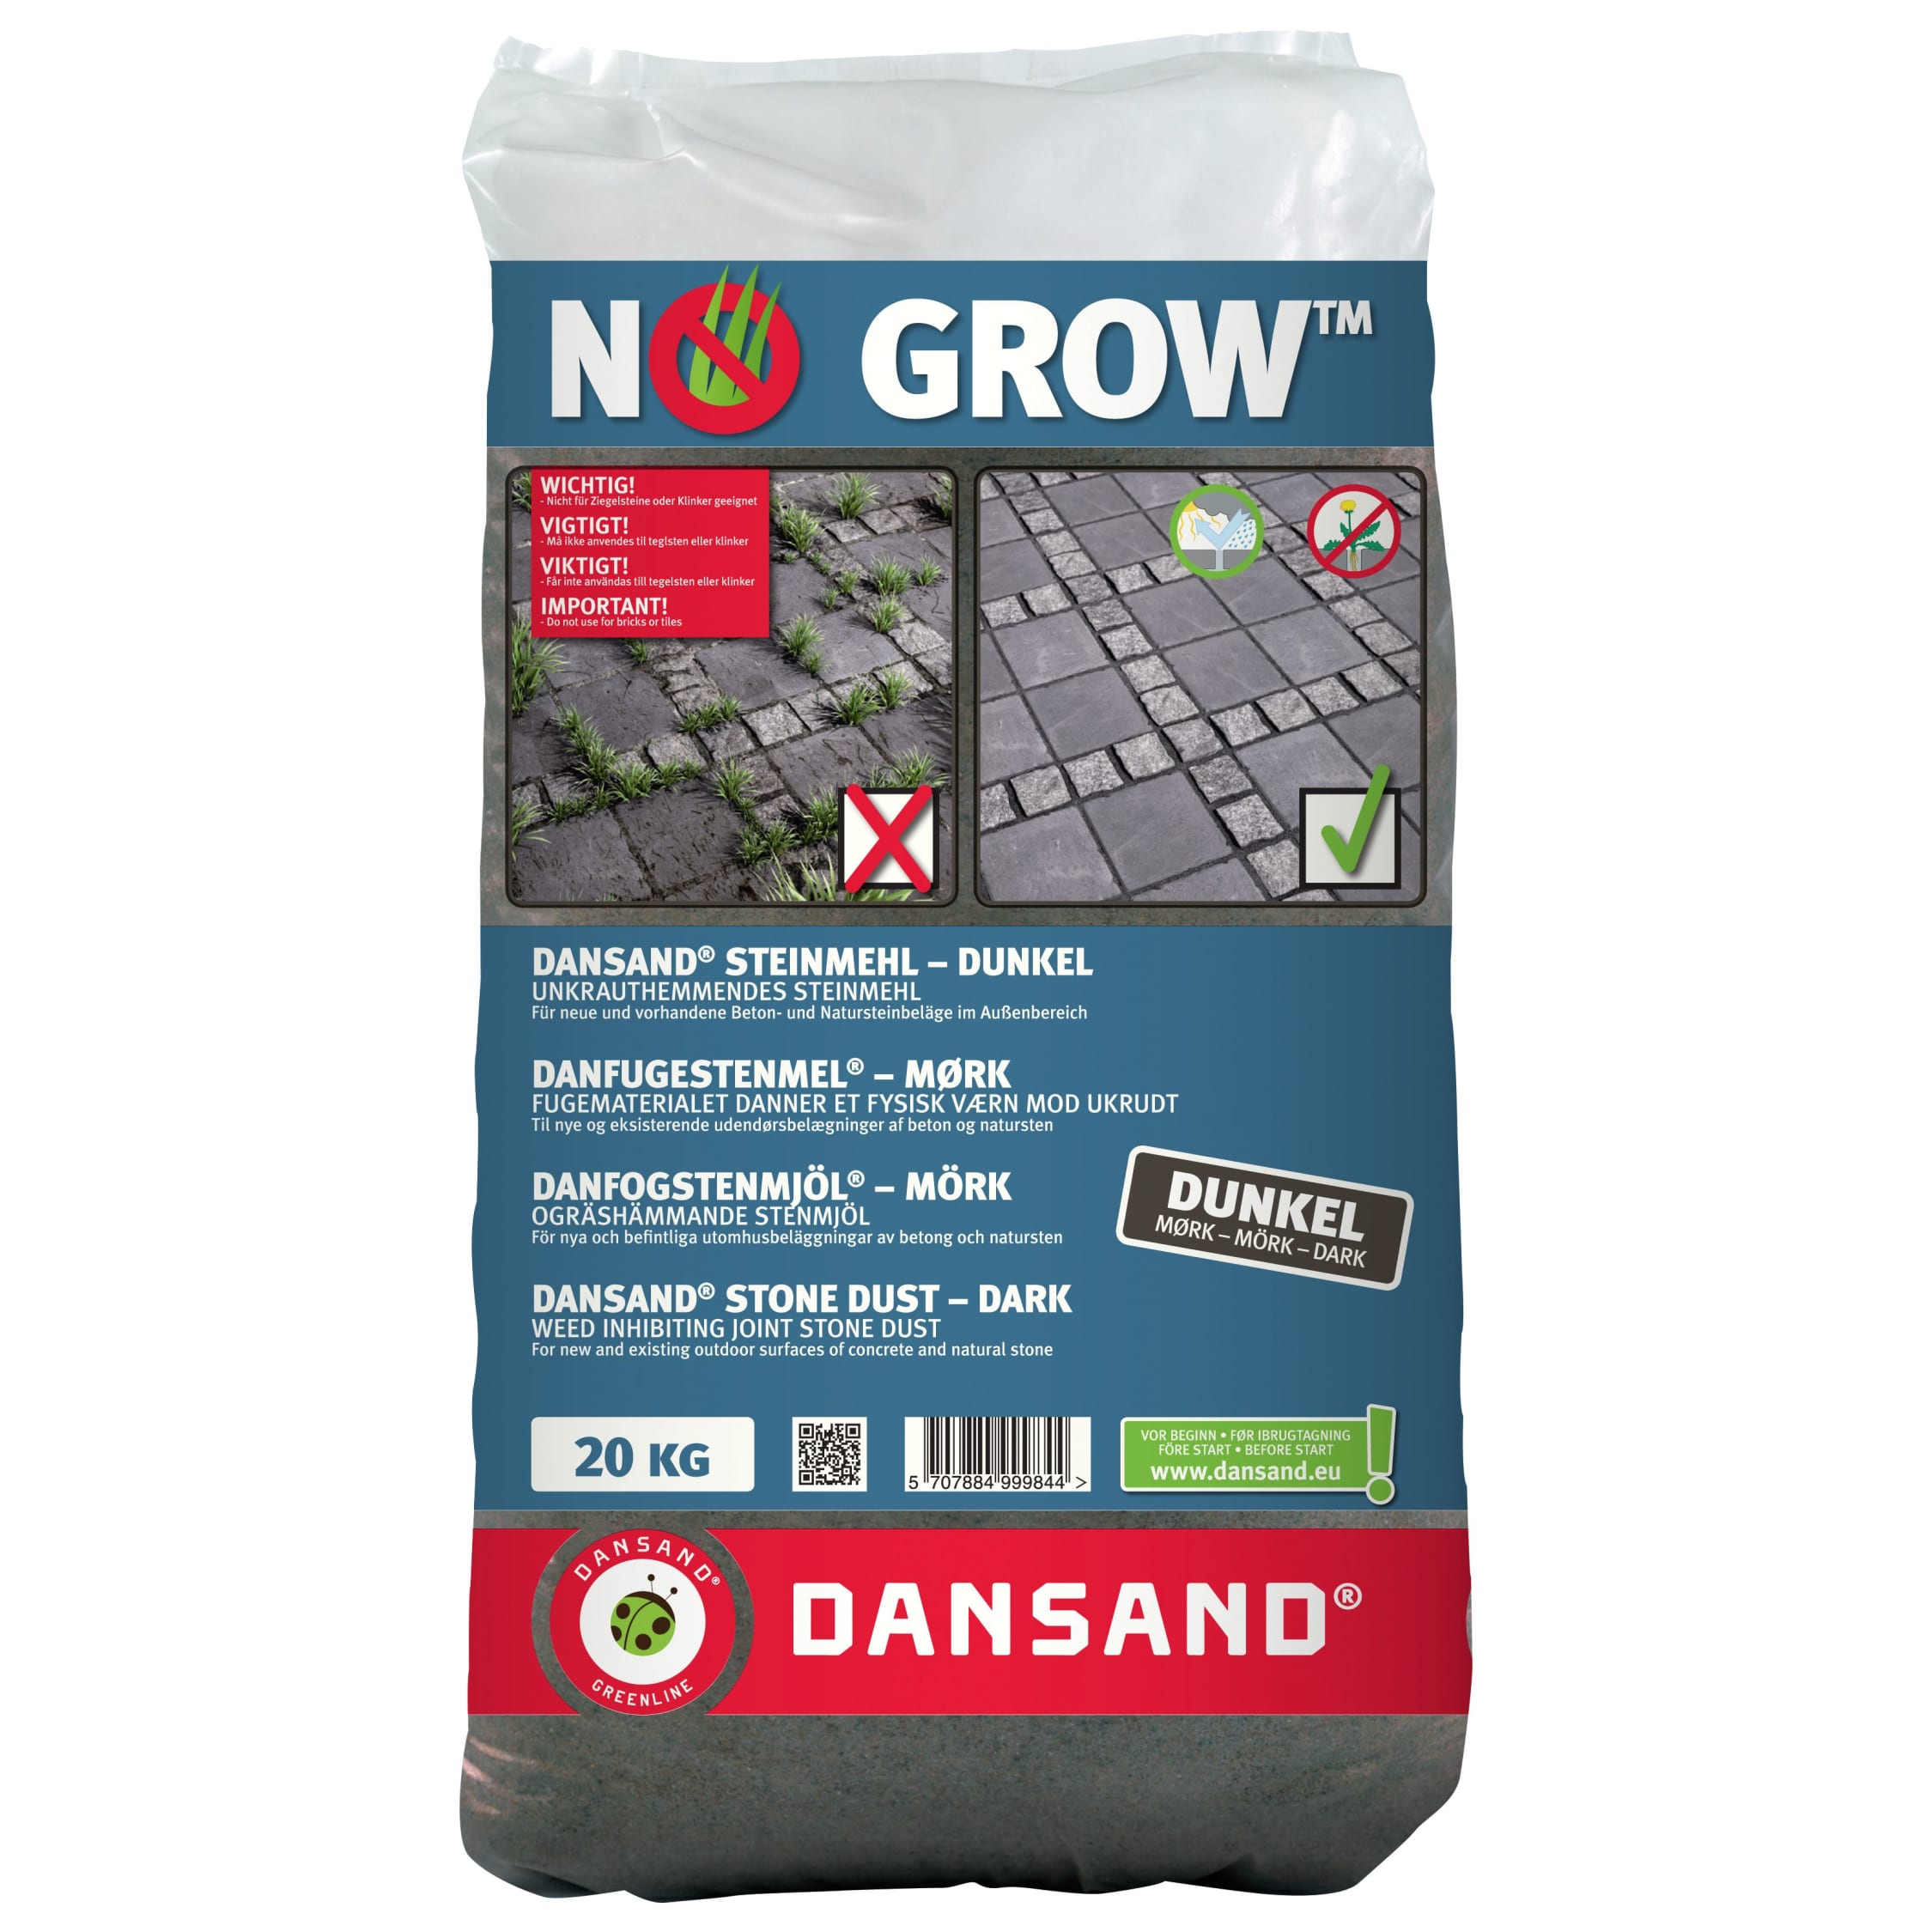 2 x Dansand No Grow No Weed Paving Sand 20KG For Drives Paths Pavements 